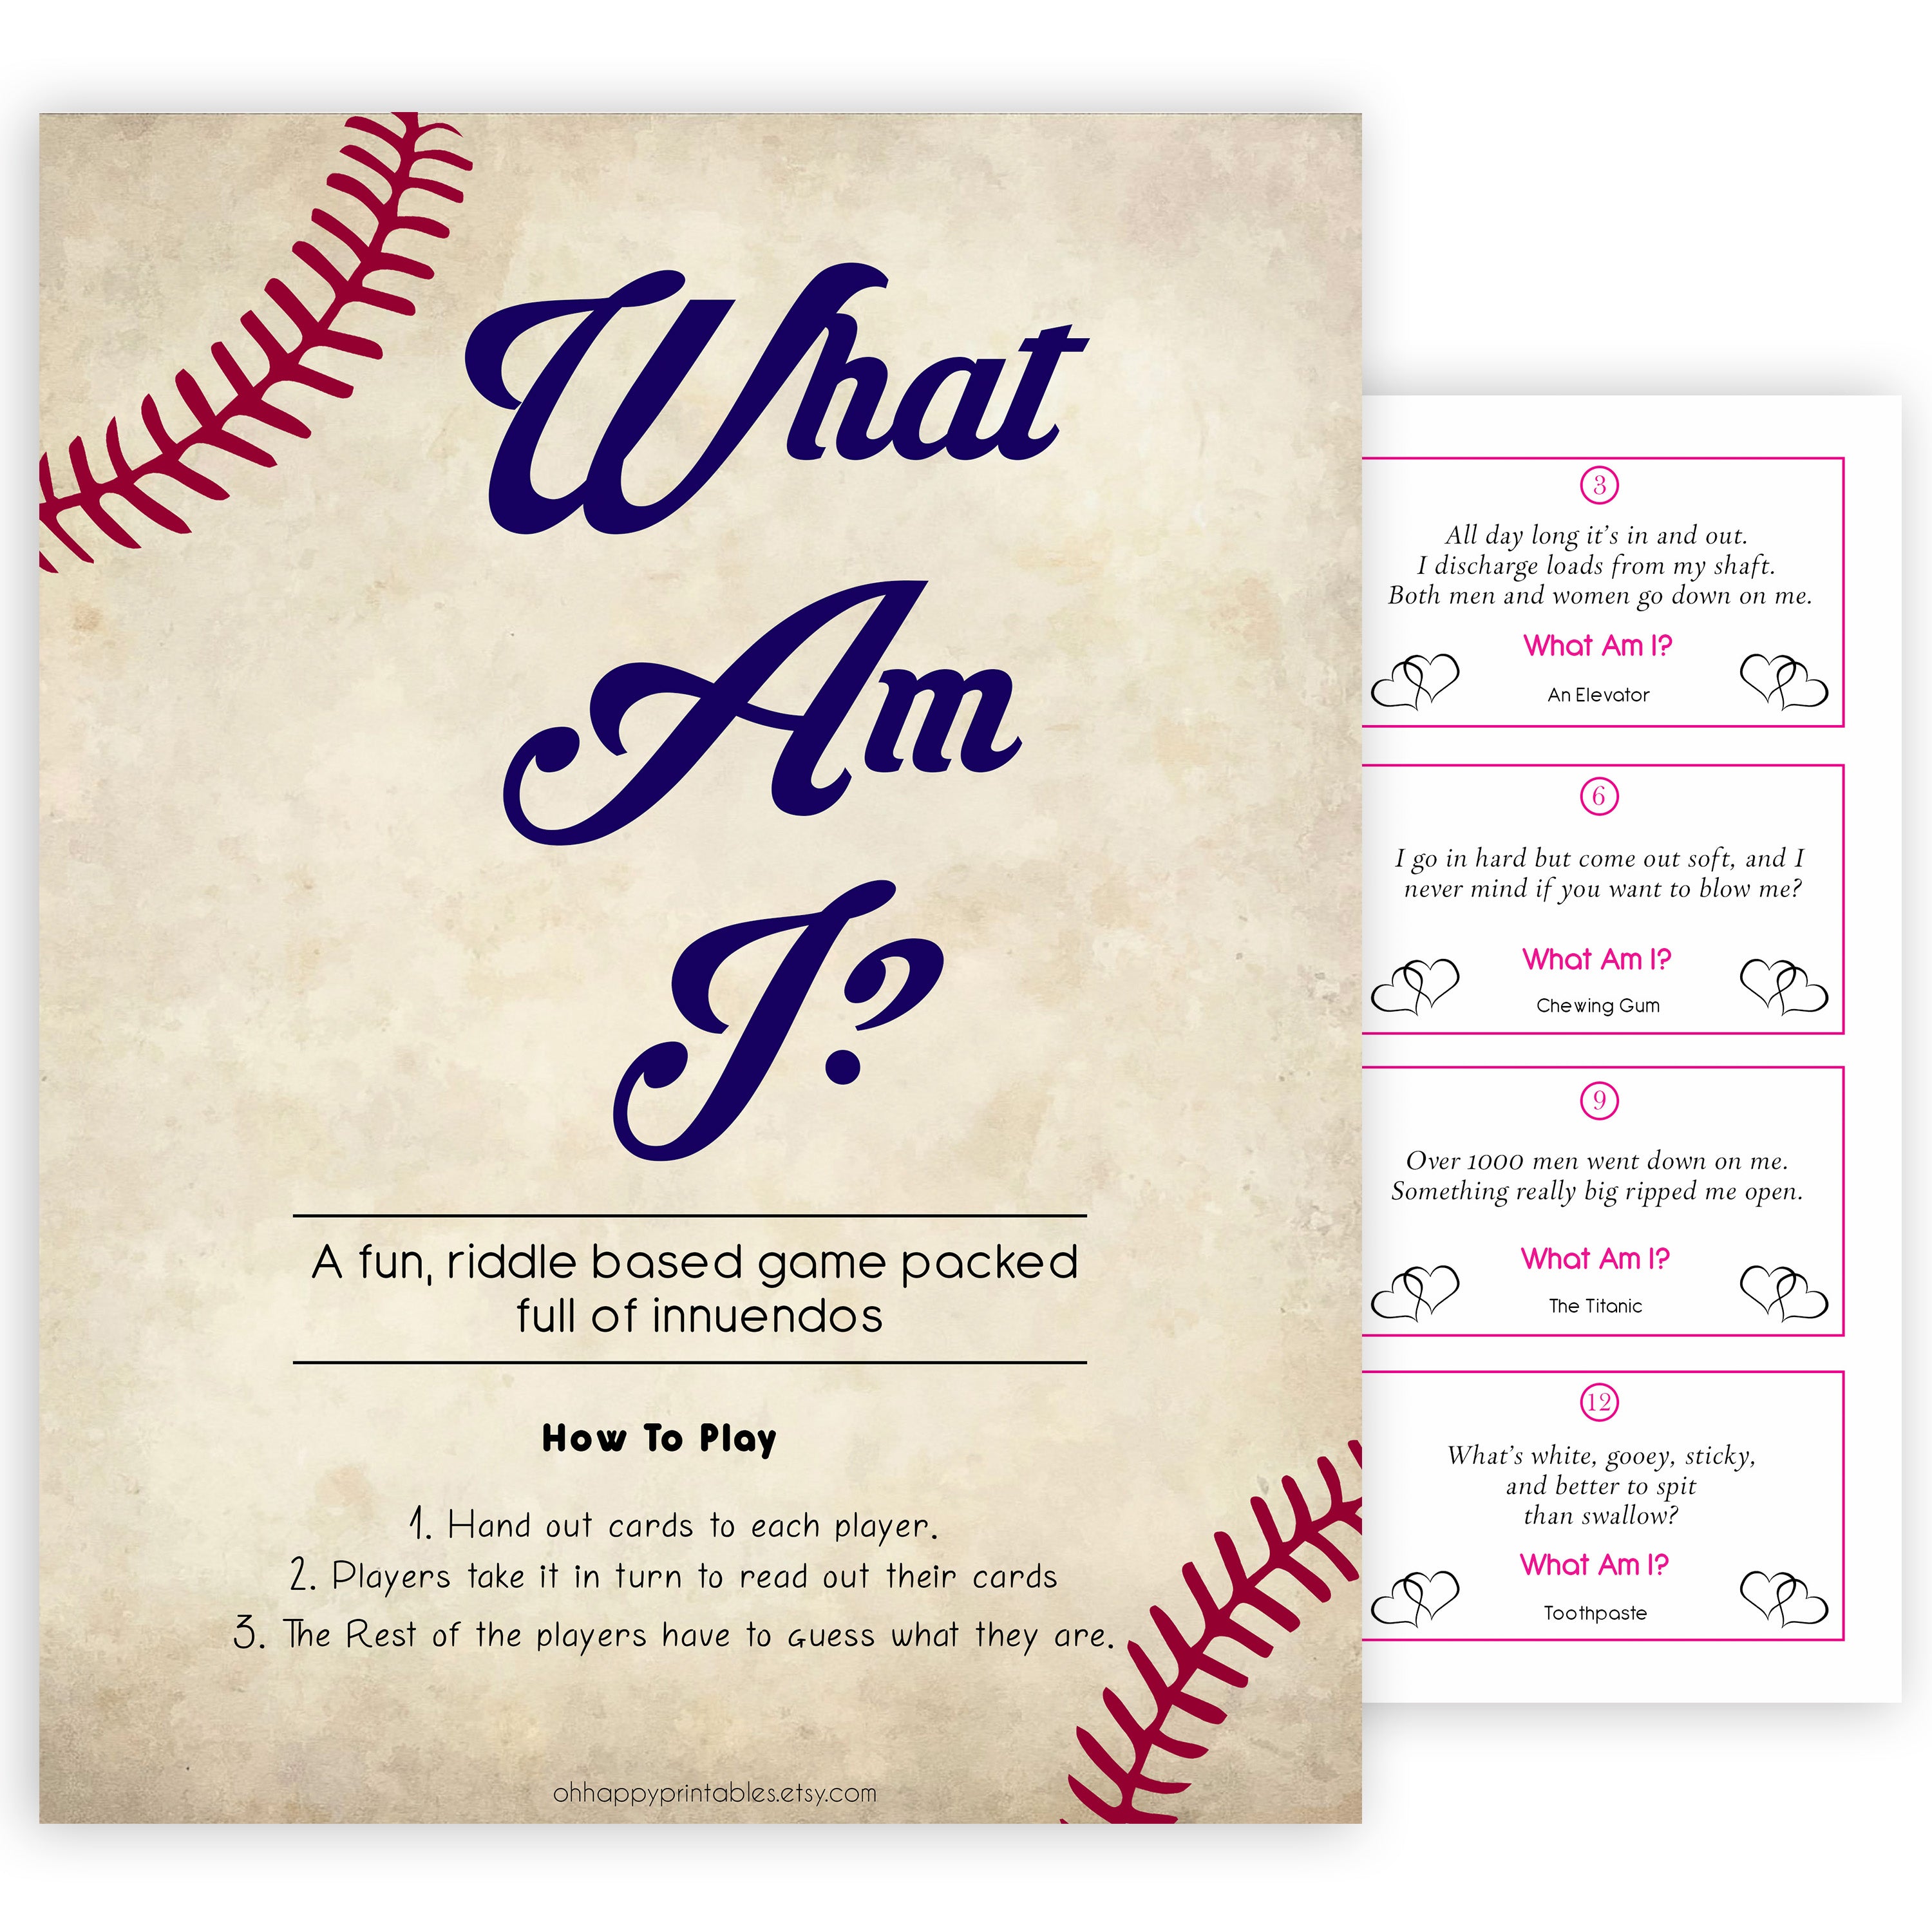 24 What Am I Innuendo Baby Shower Games, Baseball Innuendo Riddle Baby Shower Games, What Am I Games, Baby Games, Adult Baby Shower, printable baby shower games, fun baby shower games, popular baby shower games